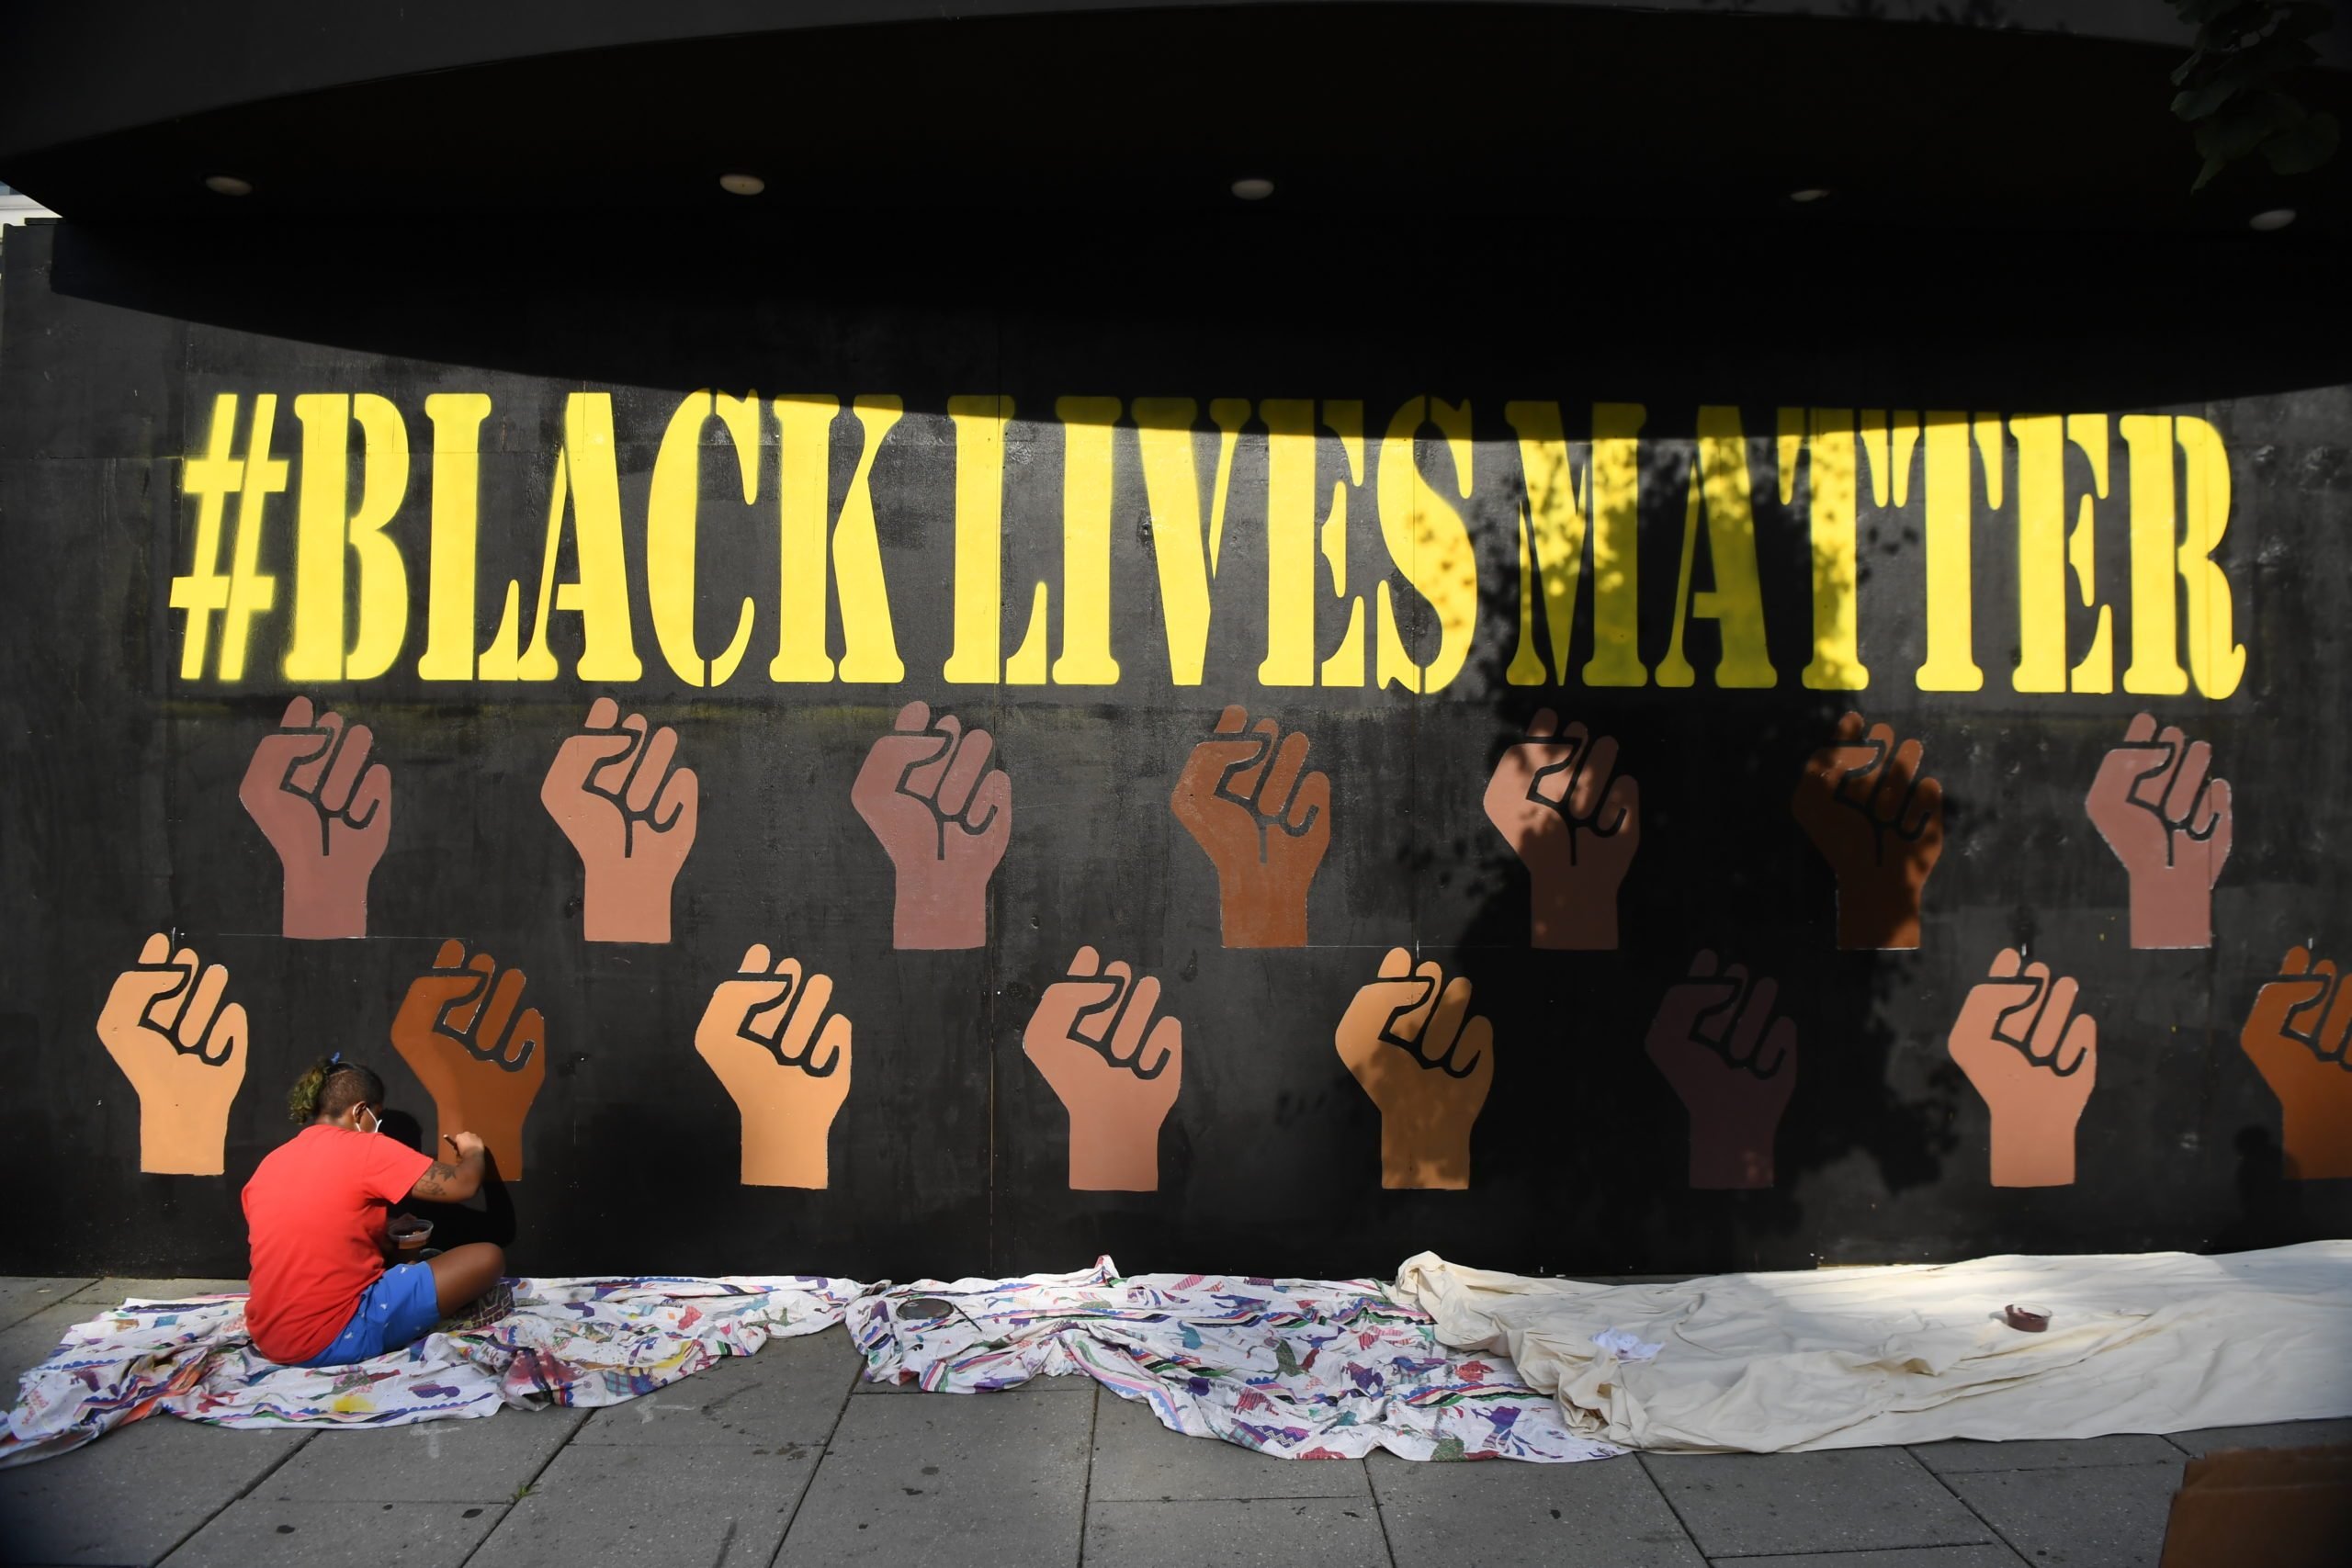 a woman works on painting a black lives matter mural in washington dc